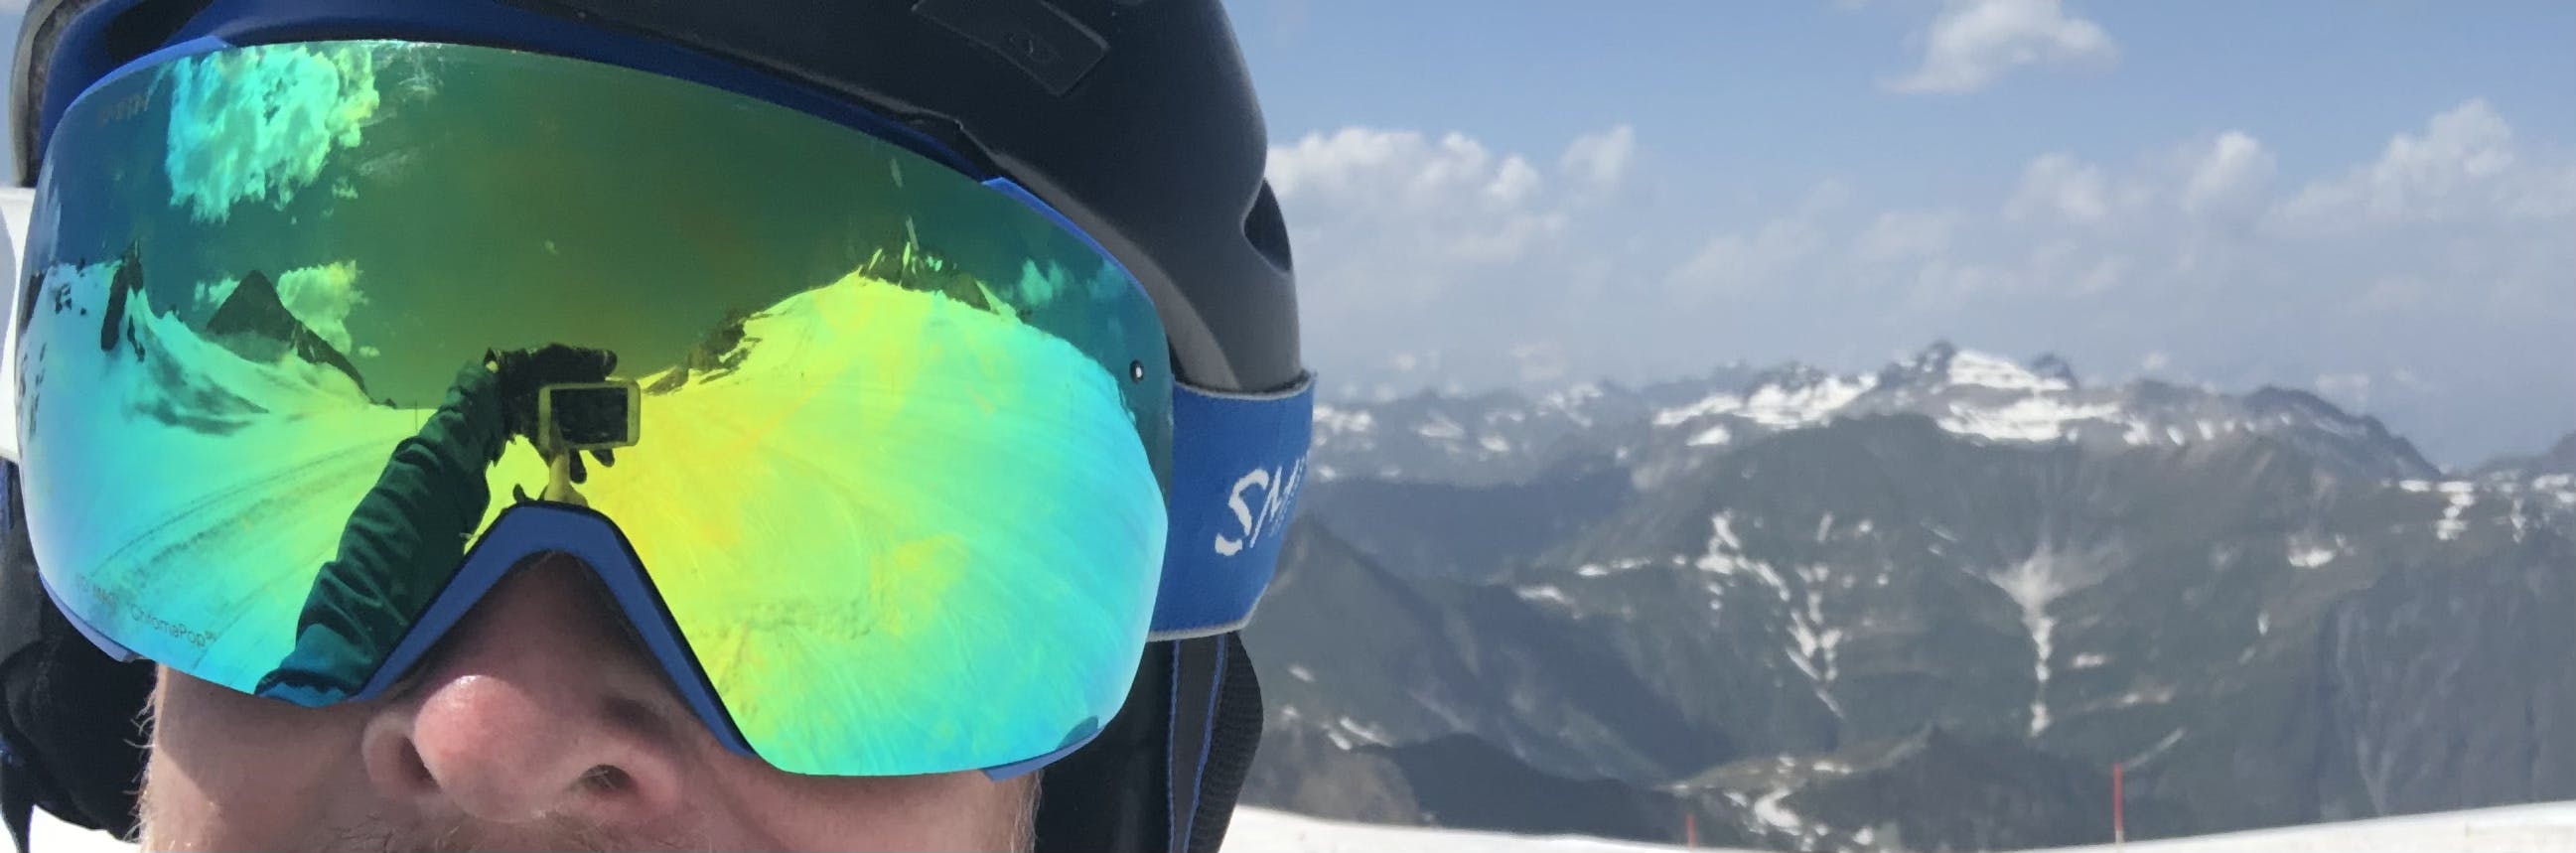 A man takes a selfie at a ski area while he is wearing goggles and a helmet. 